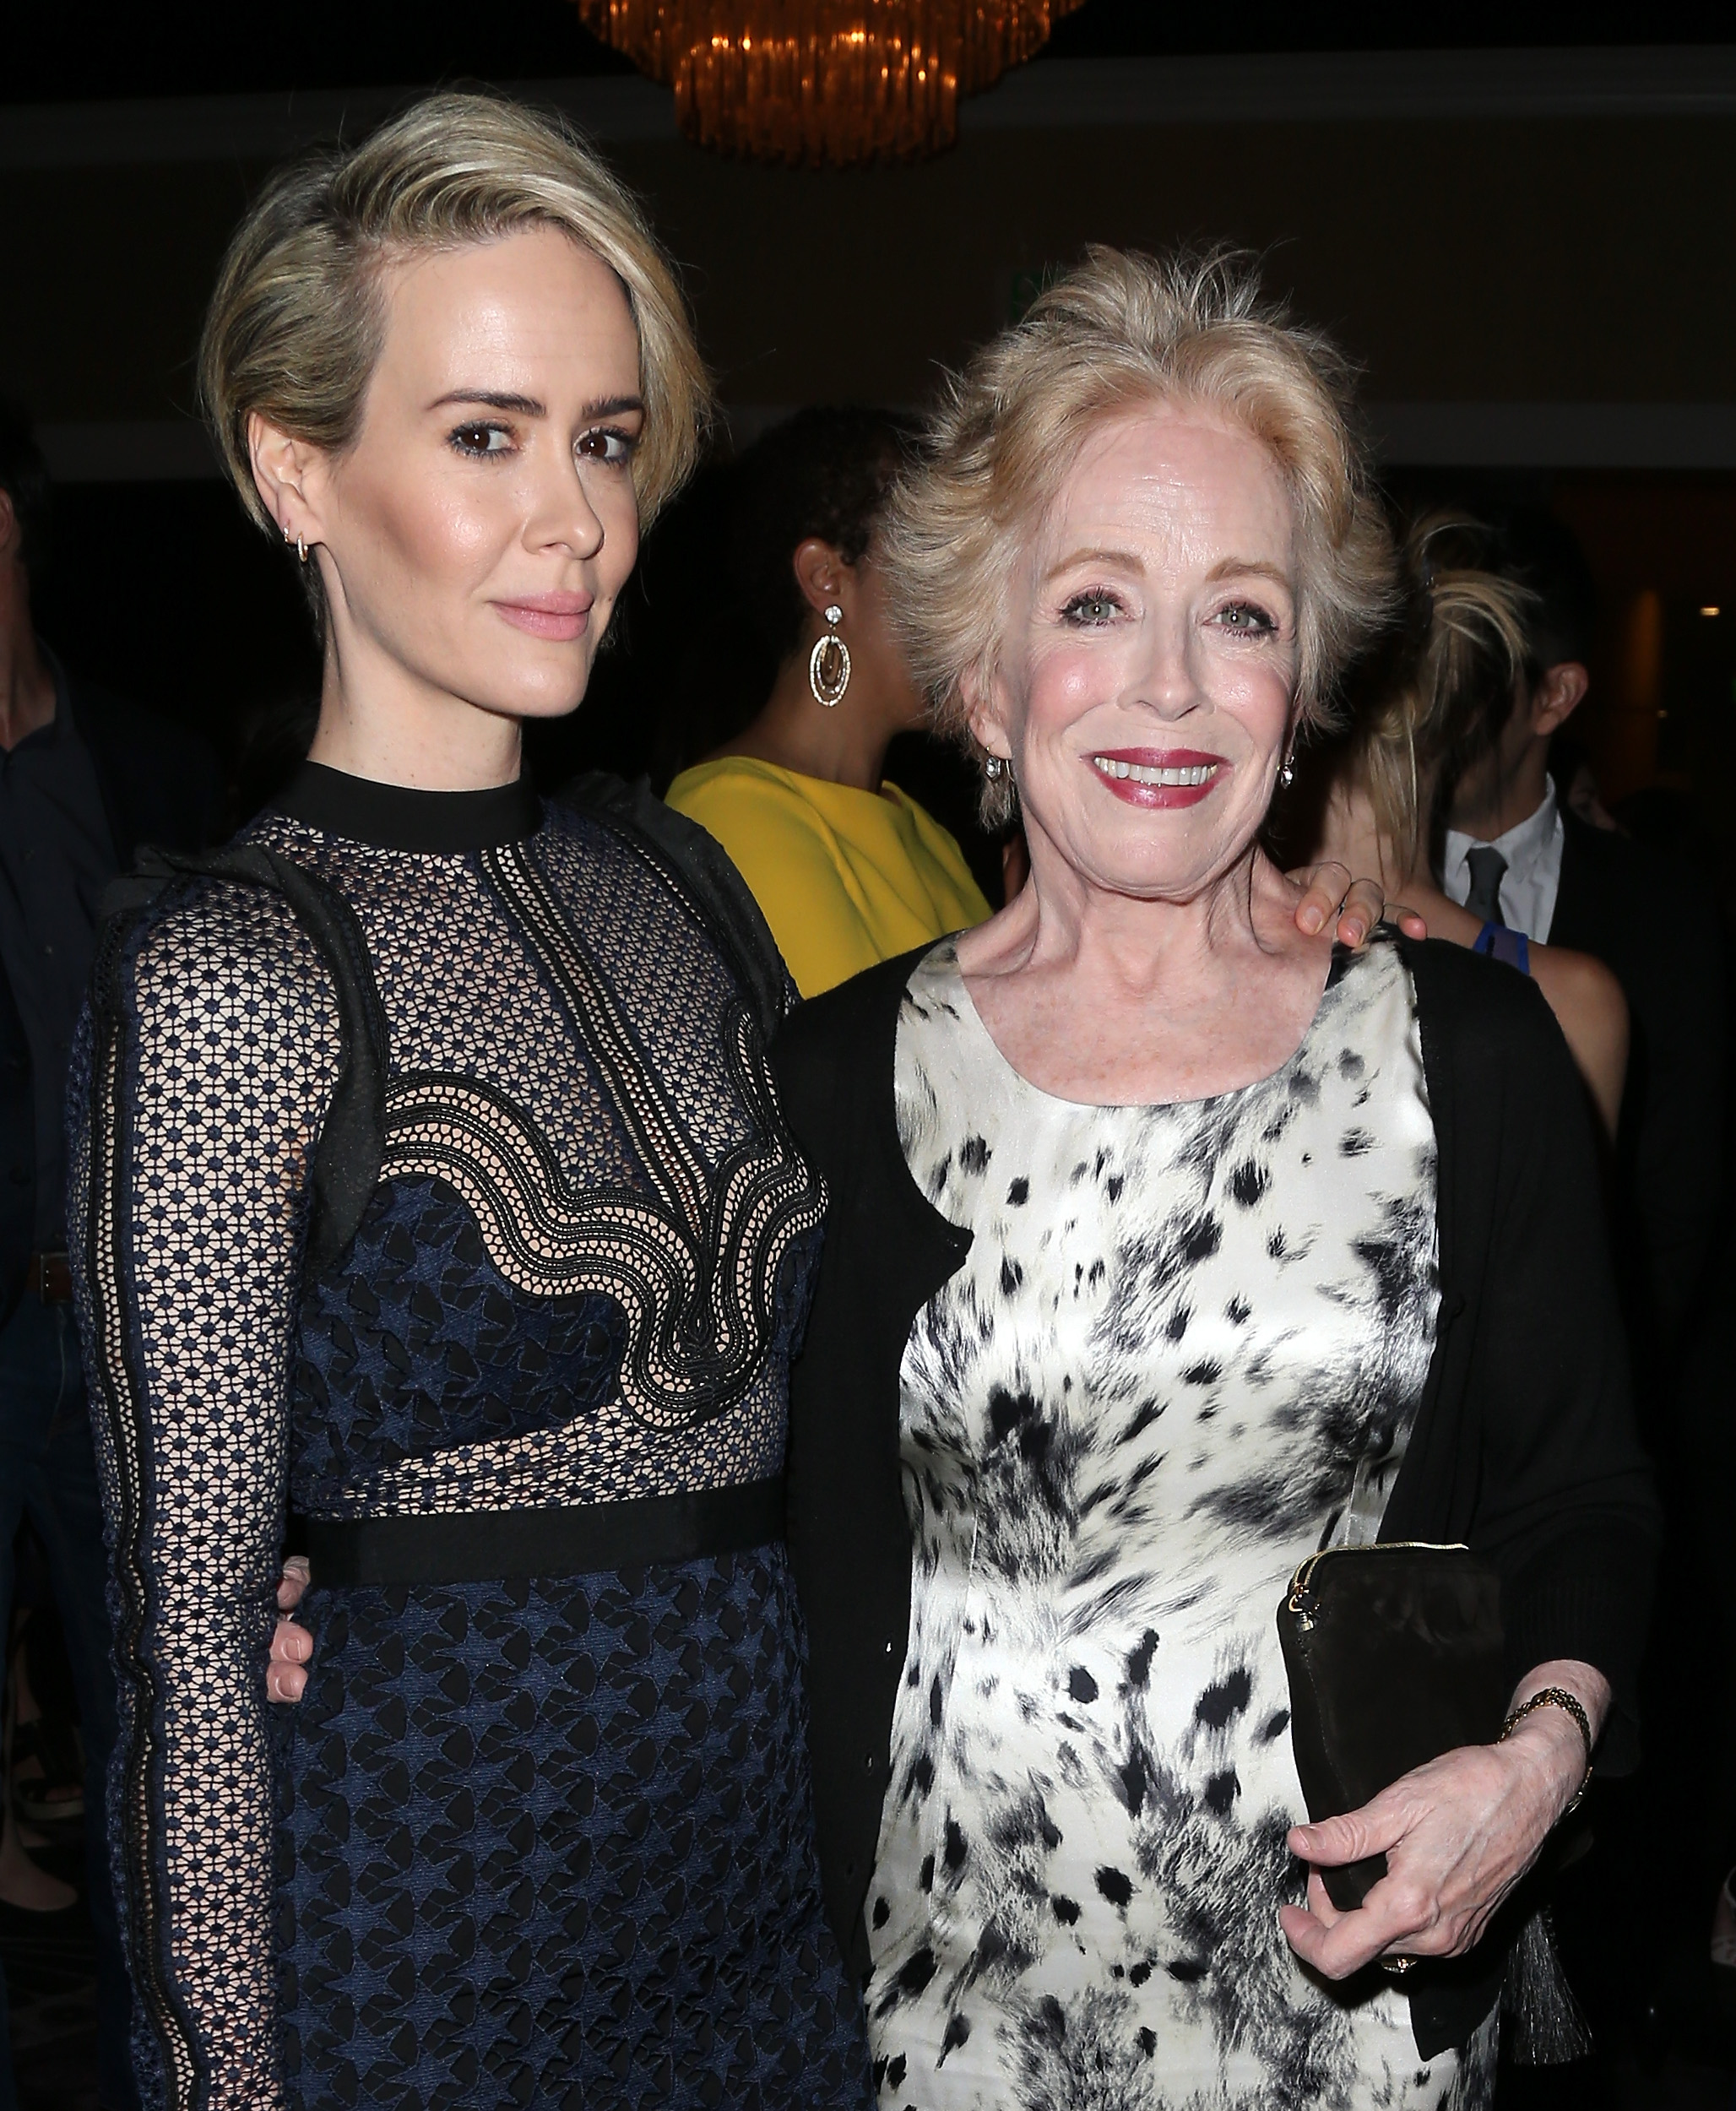 Sarah Paulson was told that dating Holland Taylor could damage her career |  PinkNews